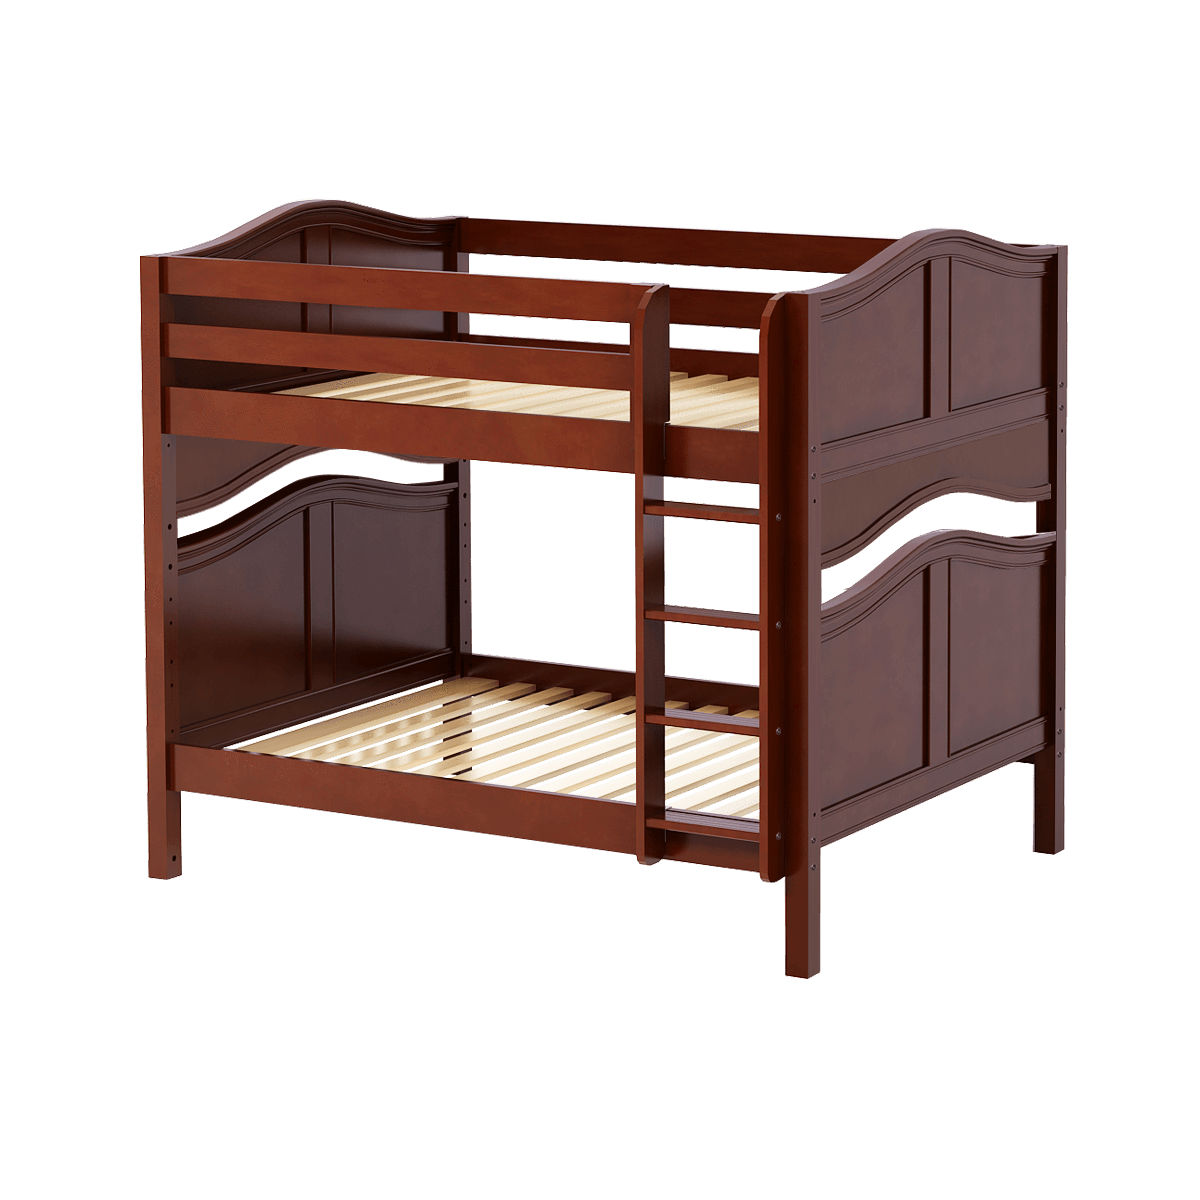 Maxtrix Full Curved Bunk Bed